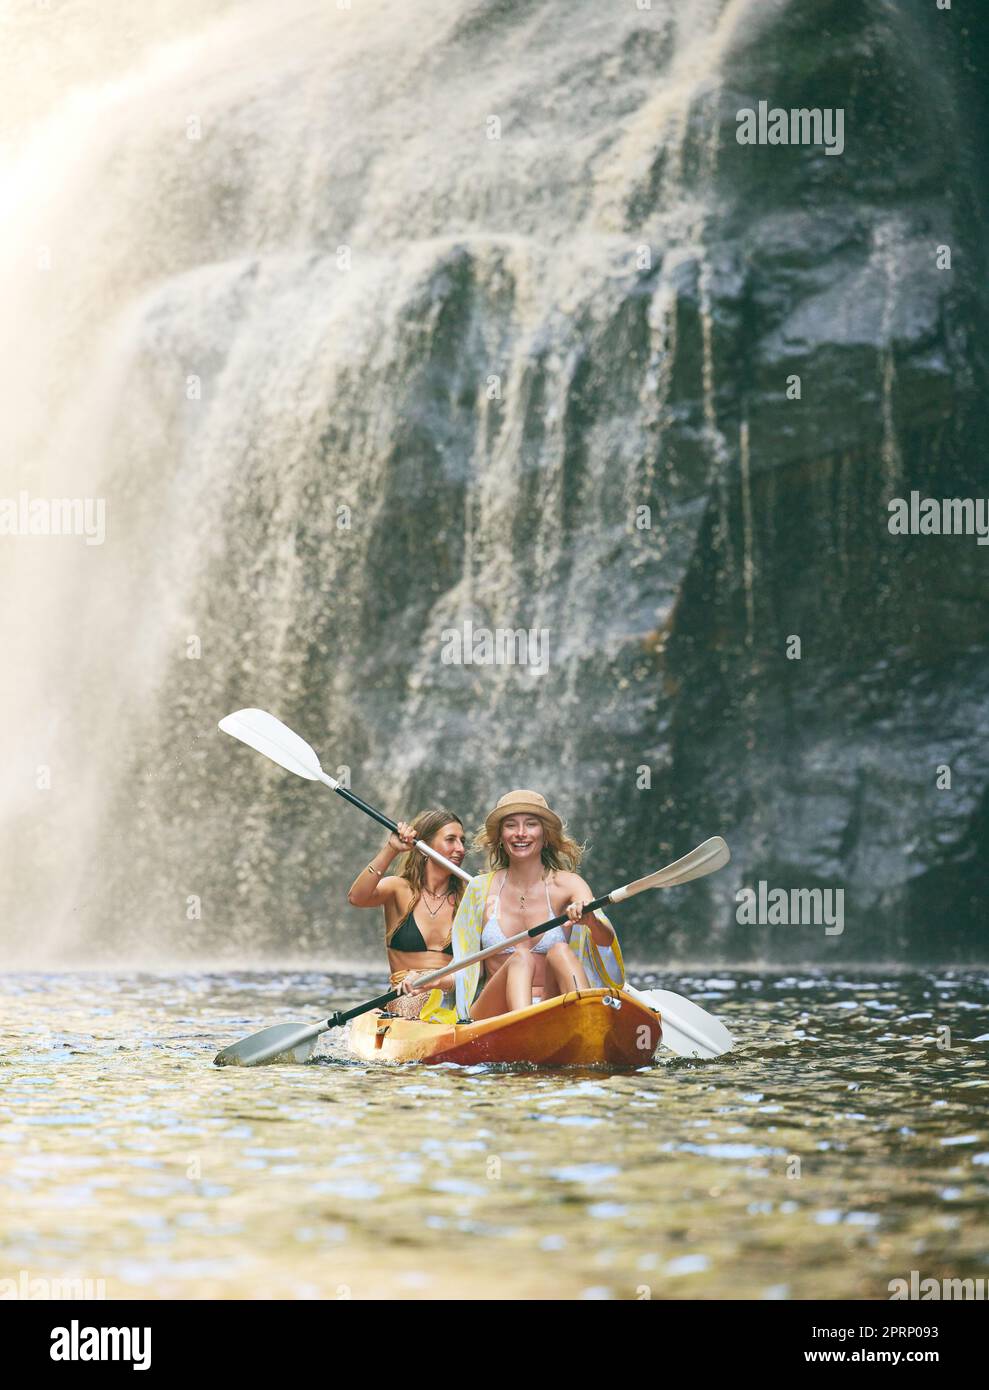 Kayak, summer and friends on river, nature and vacation adventure together in bikini swimsuit. Holiday, waterfall and freedom with young happy women rowing in a canoeing boat travel activity Stock Photo